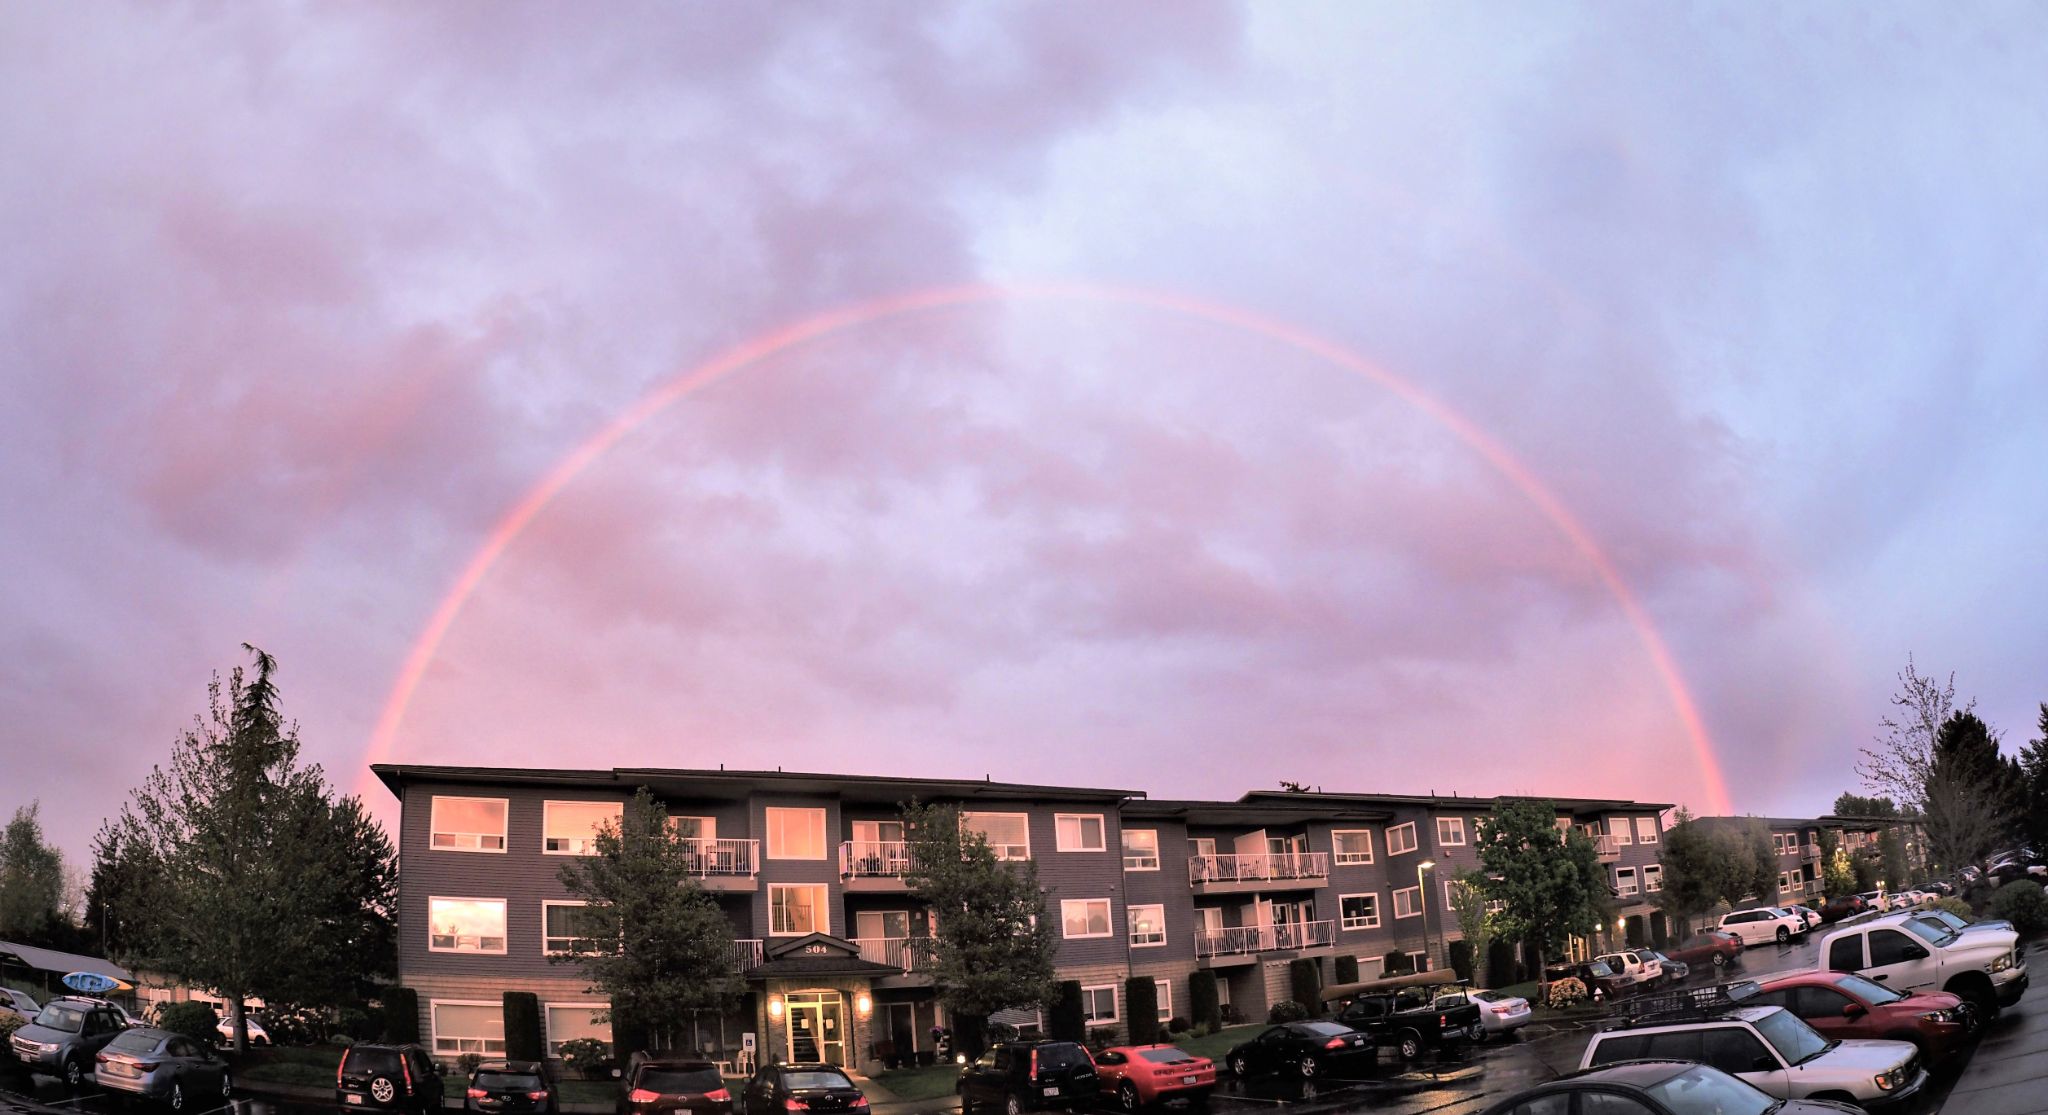 Double rainbow over what looks like an apartment complex.